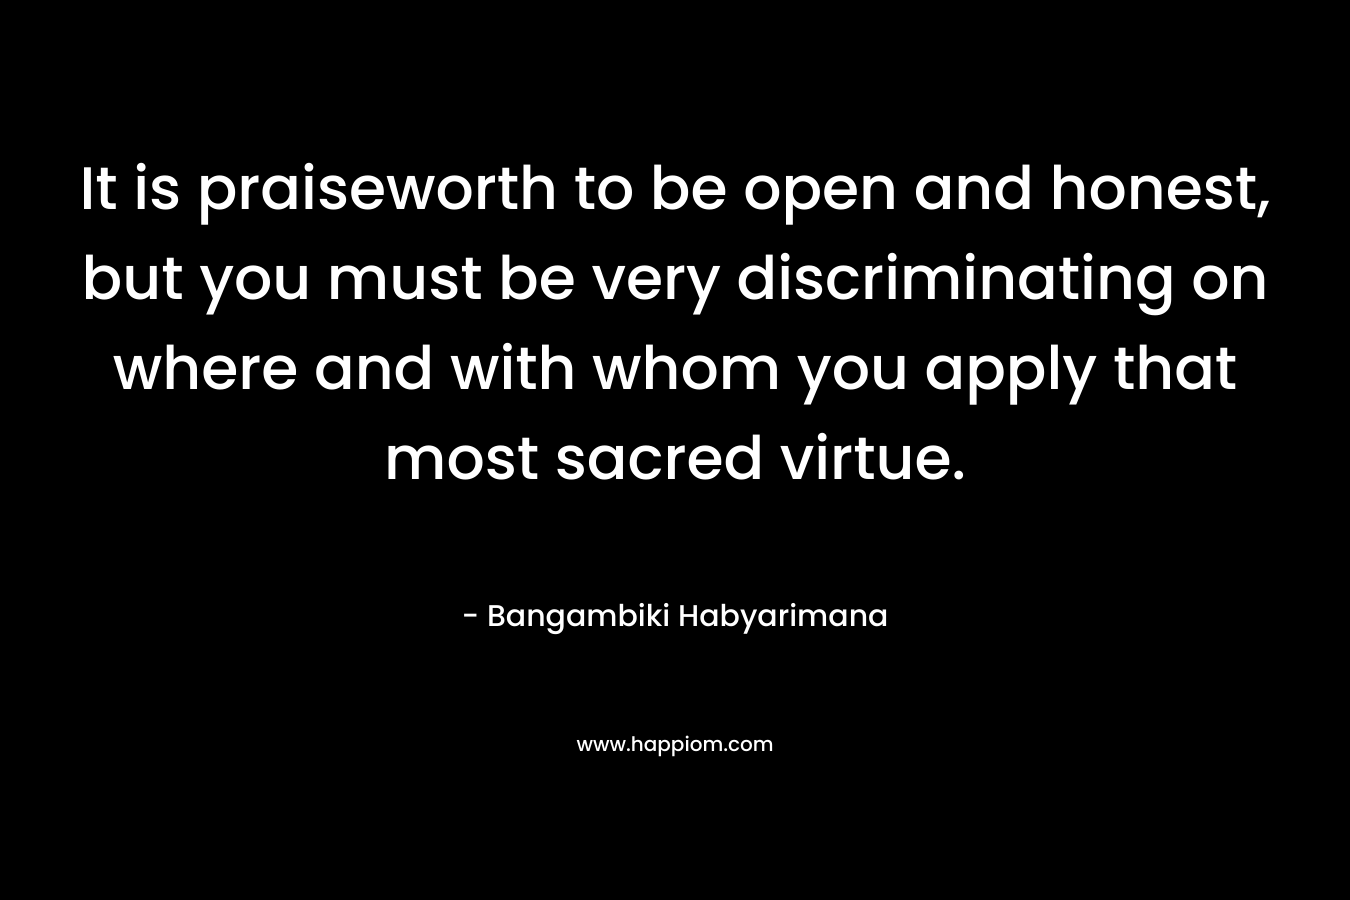 It is praiseworth to be open and honest, but you must be very discriminating on where and with whom you apply that most sacred virtue.